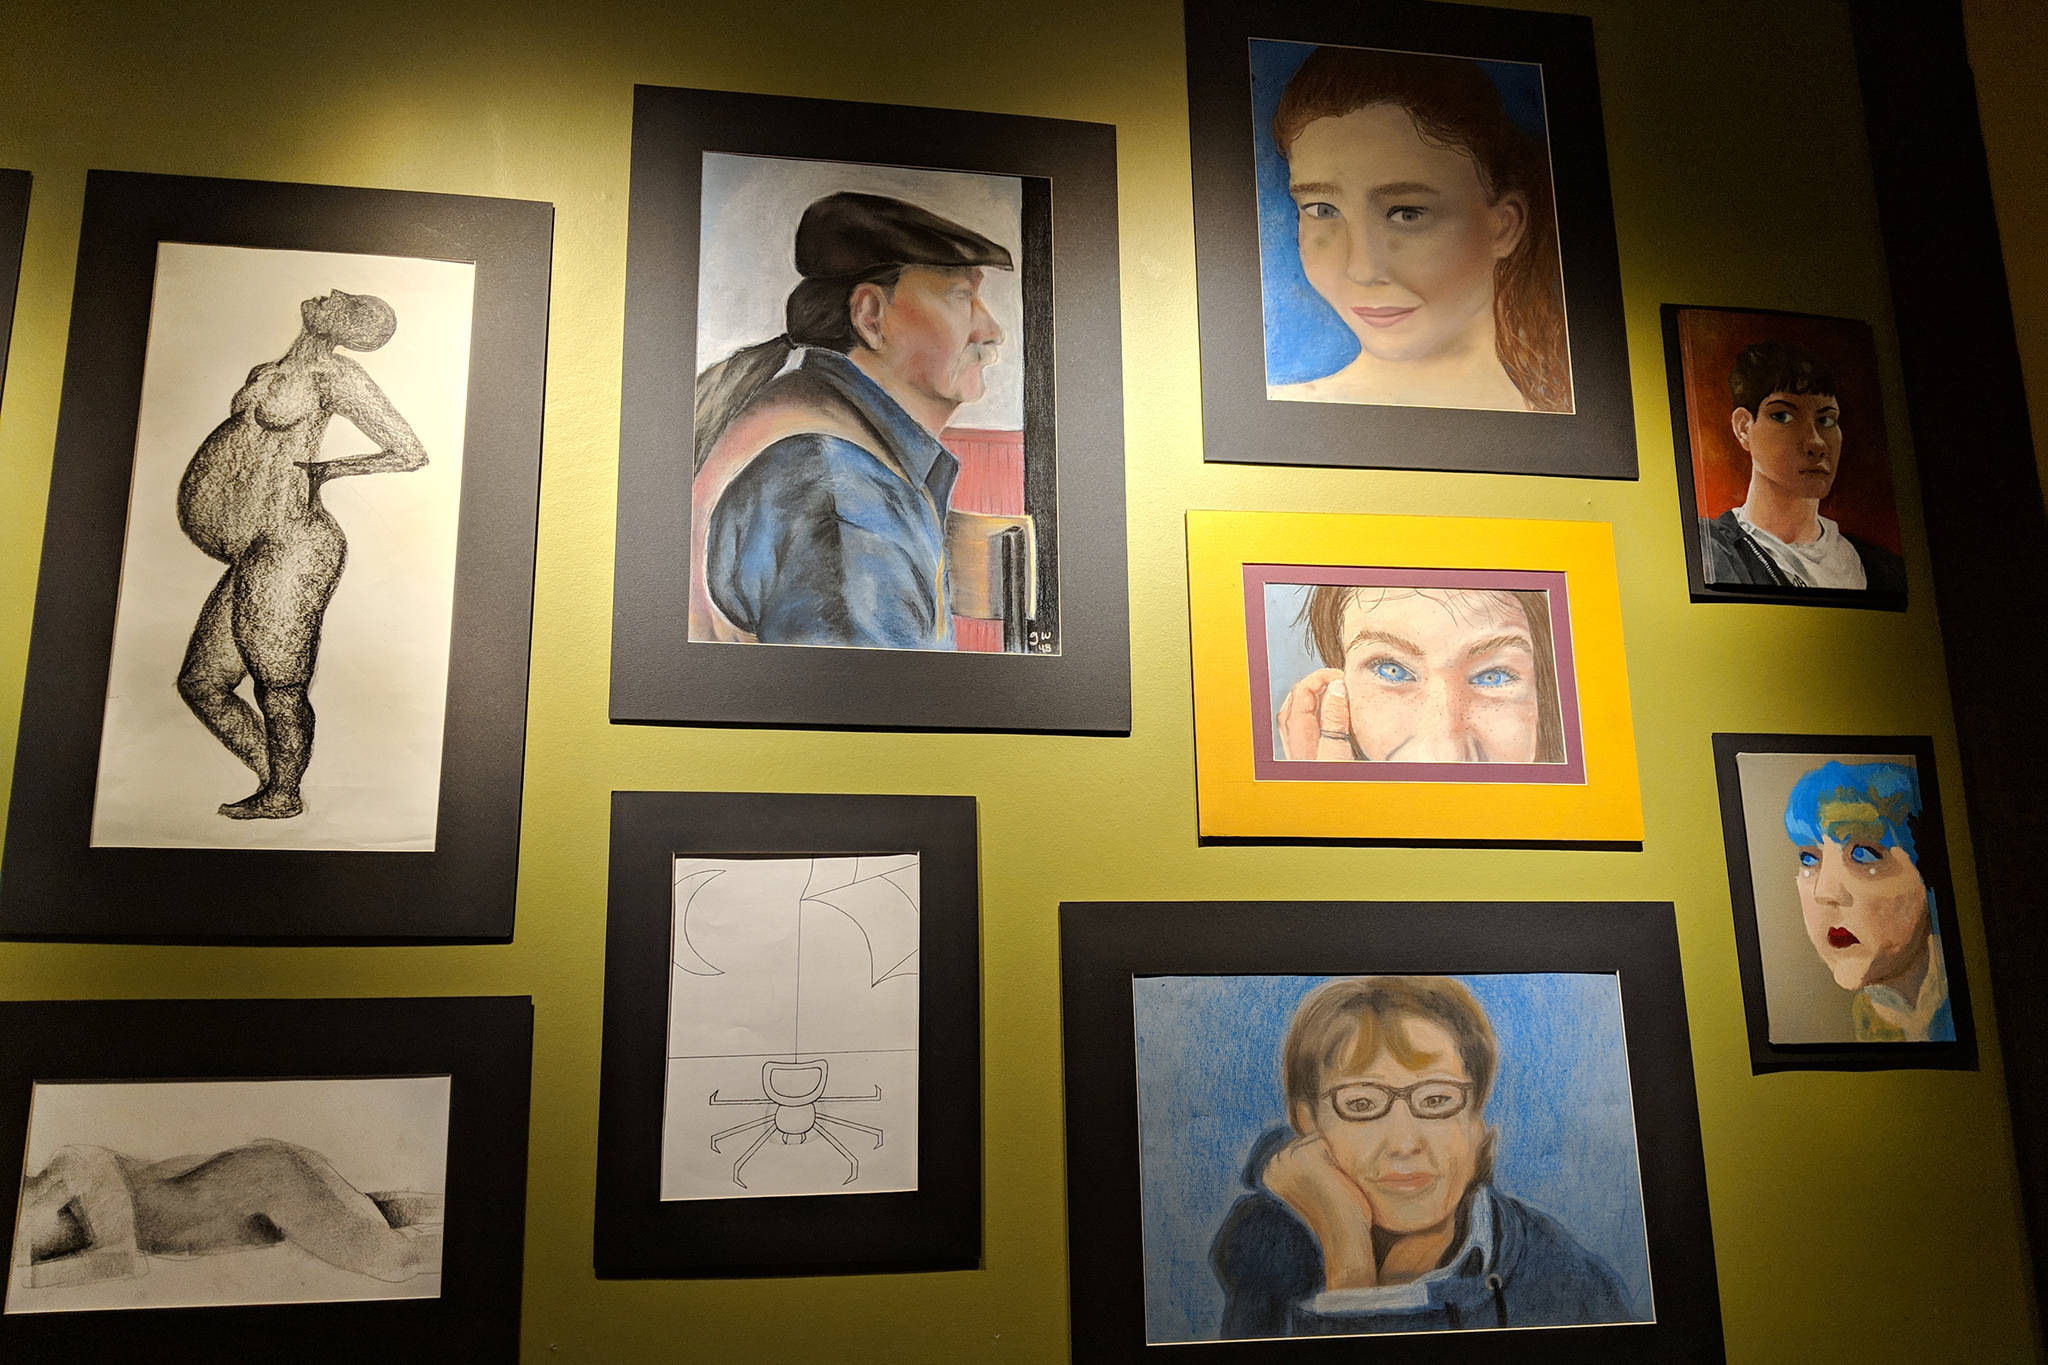 Artwork by Juneau-Douglas High School students was displayed during the Juneau Youth Services student art show at Baranof Heritage Cafe on Friday, Dec. 7, 2018. (Ben Hohenstatt | Capital City Weekly)